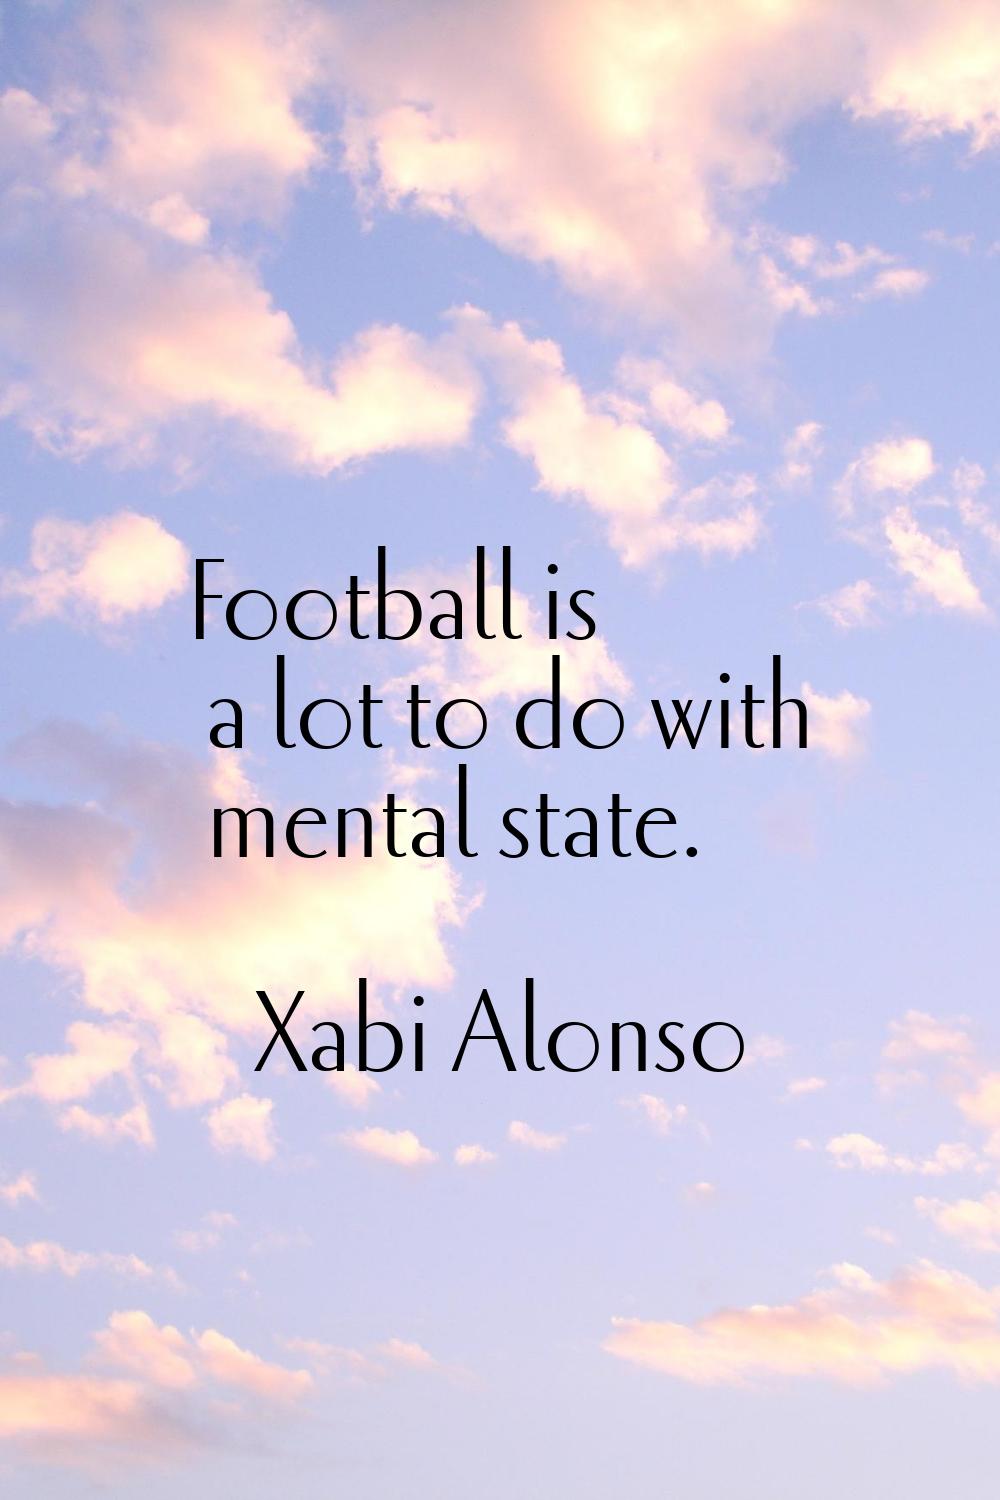 Football is a lot to do with mental state.